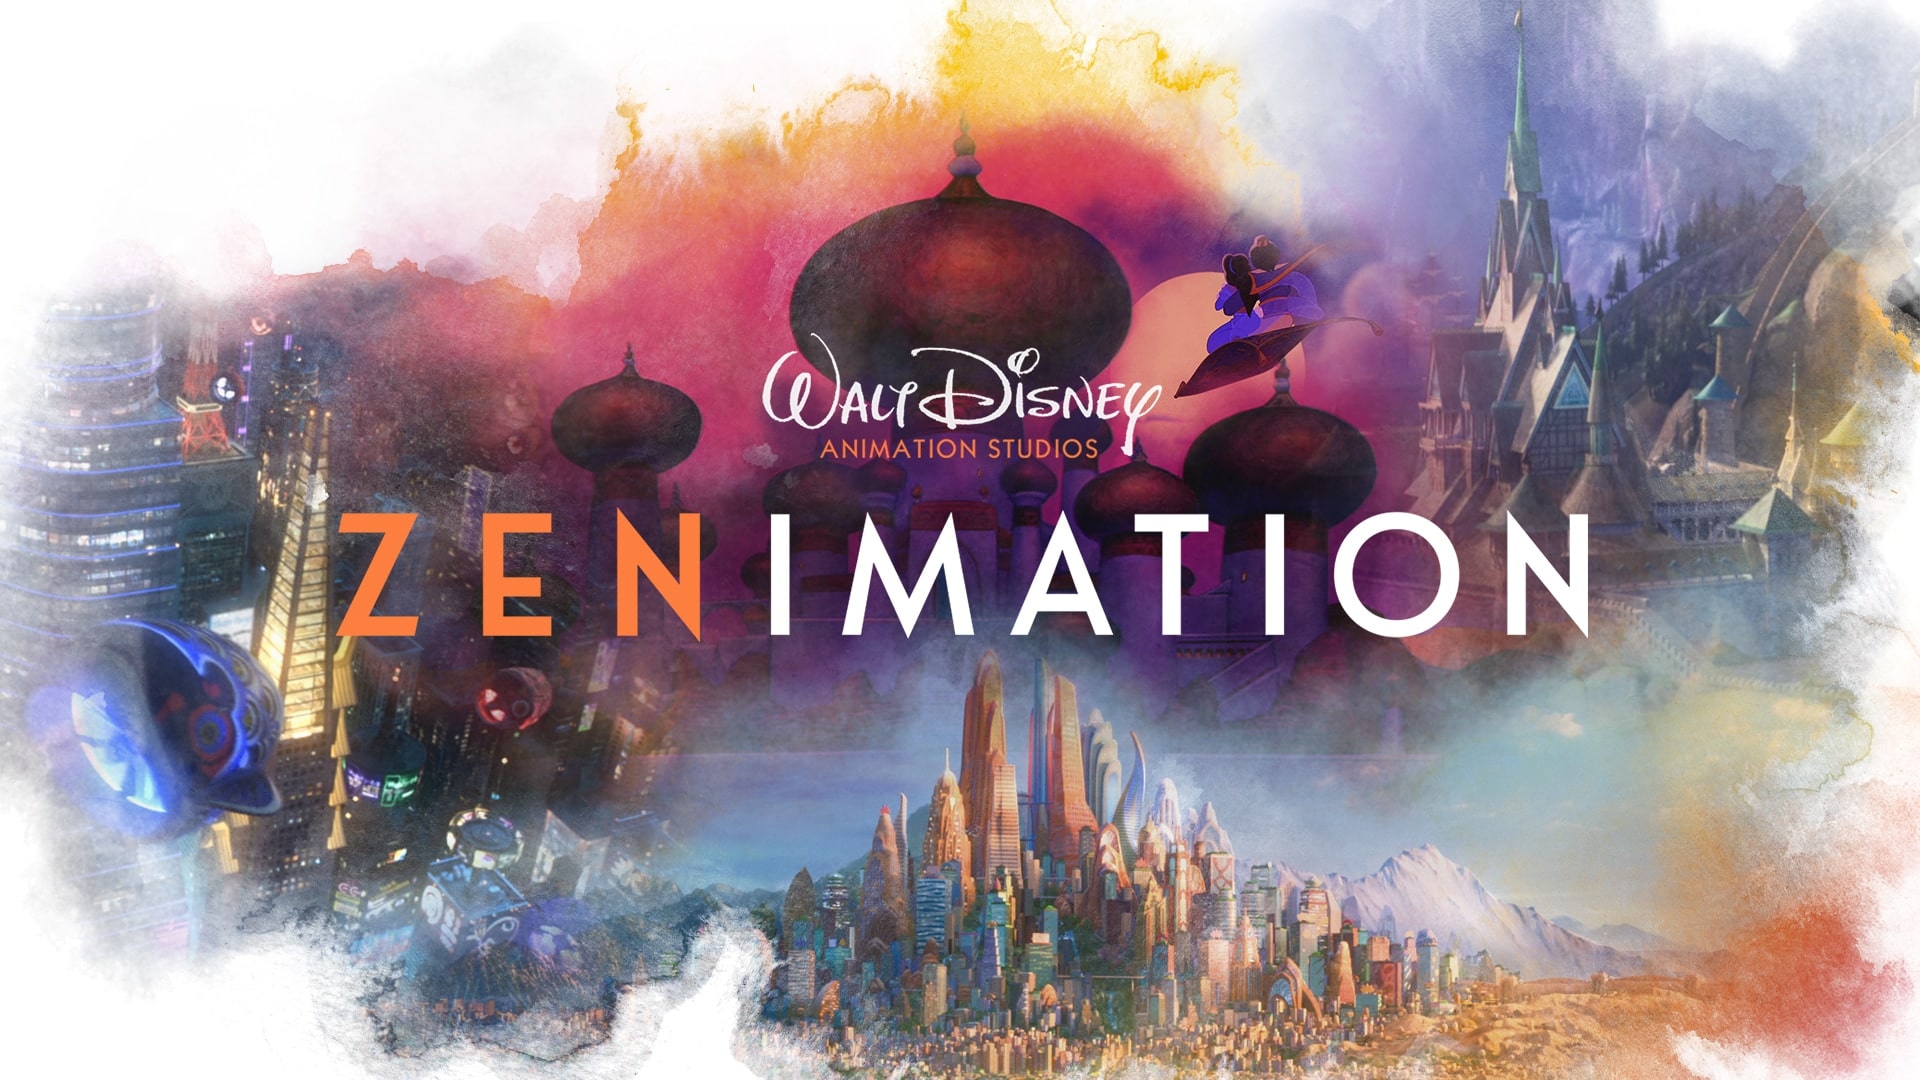 ZENIMATION Arrives on Disney+ Offering an Animated Soundscape Experience